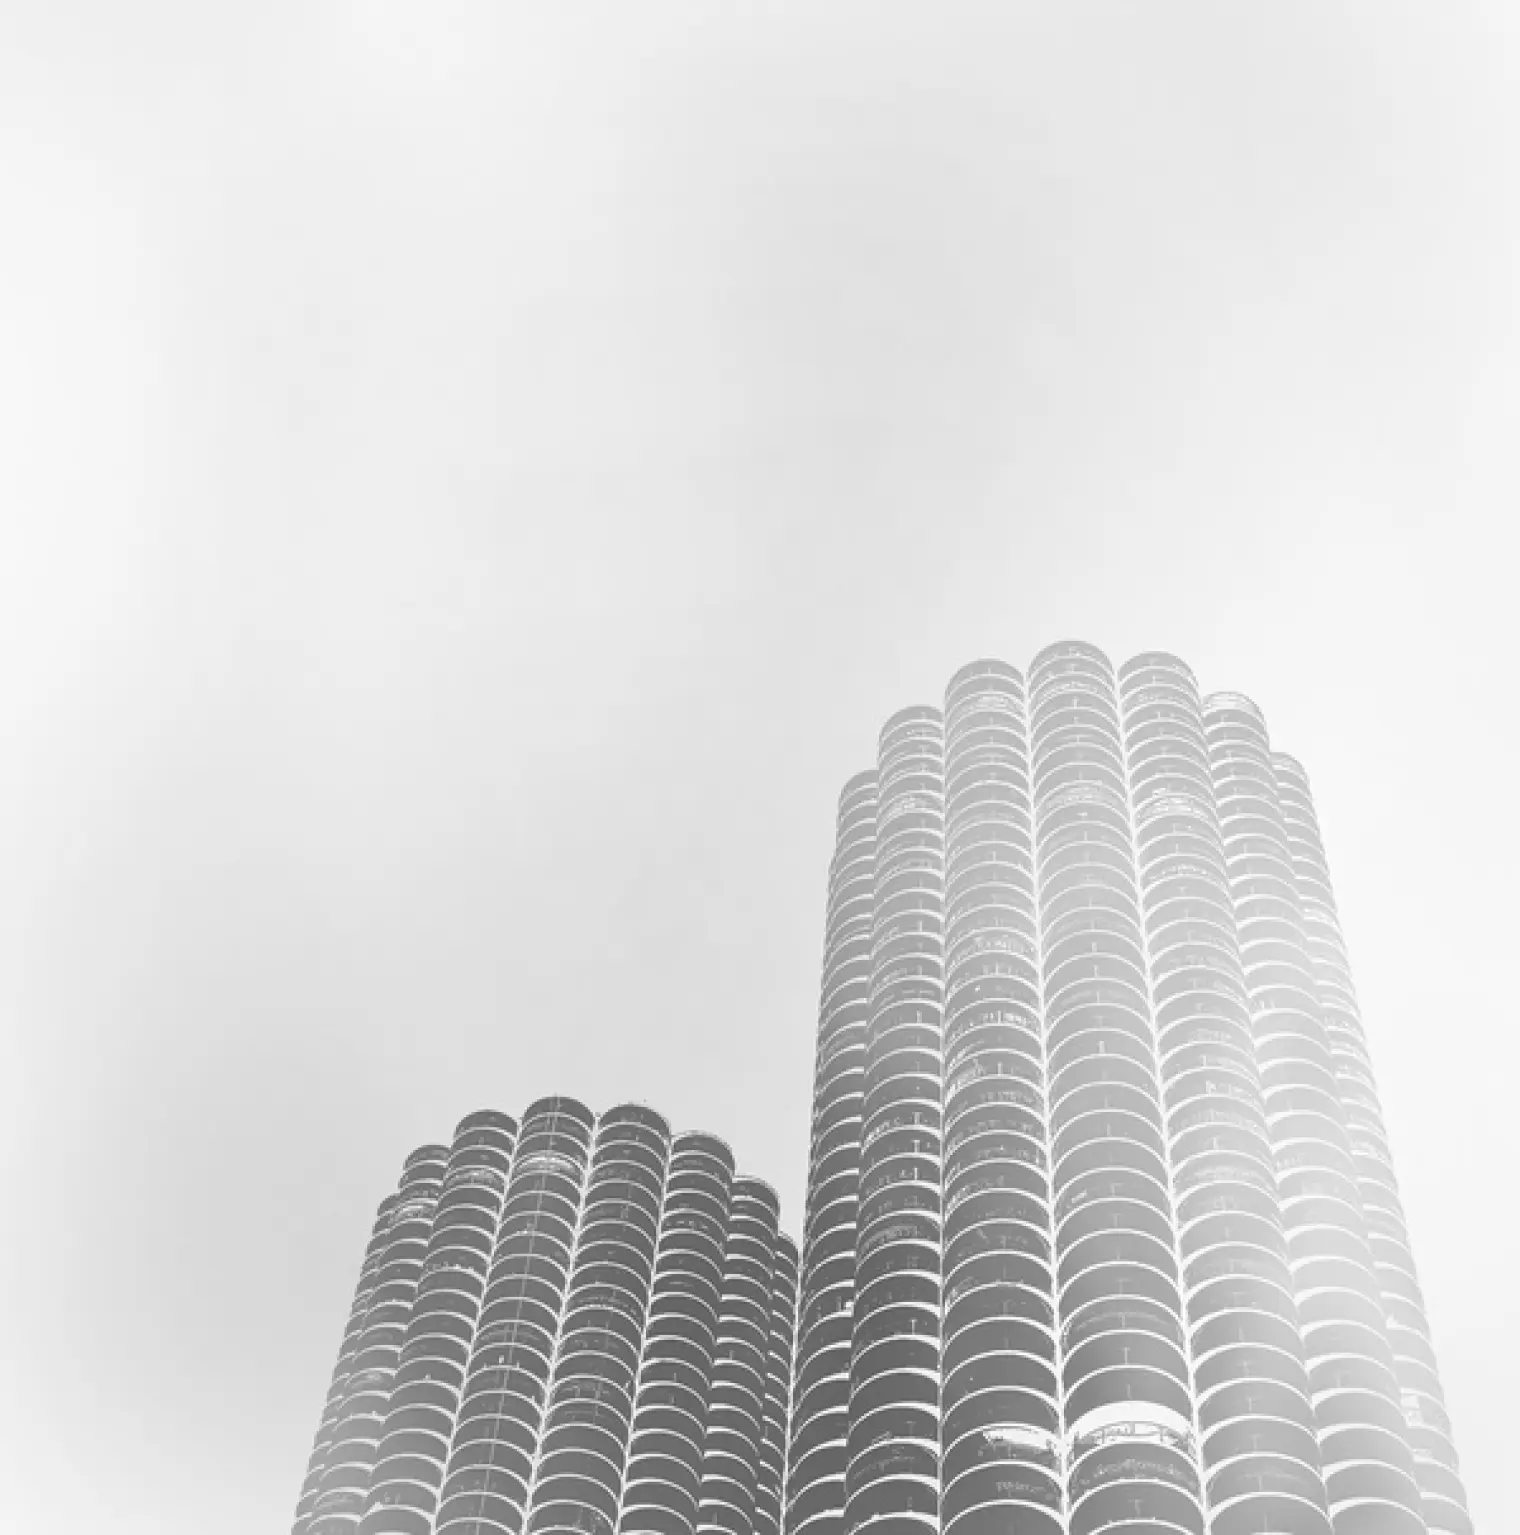 Yankee Hotel Foxtrot (Deluxe Edition) -  Wilco 